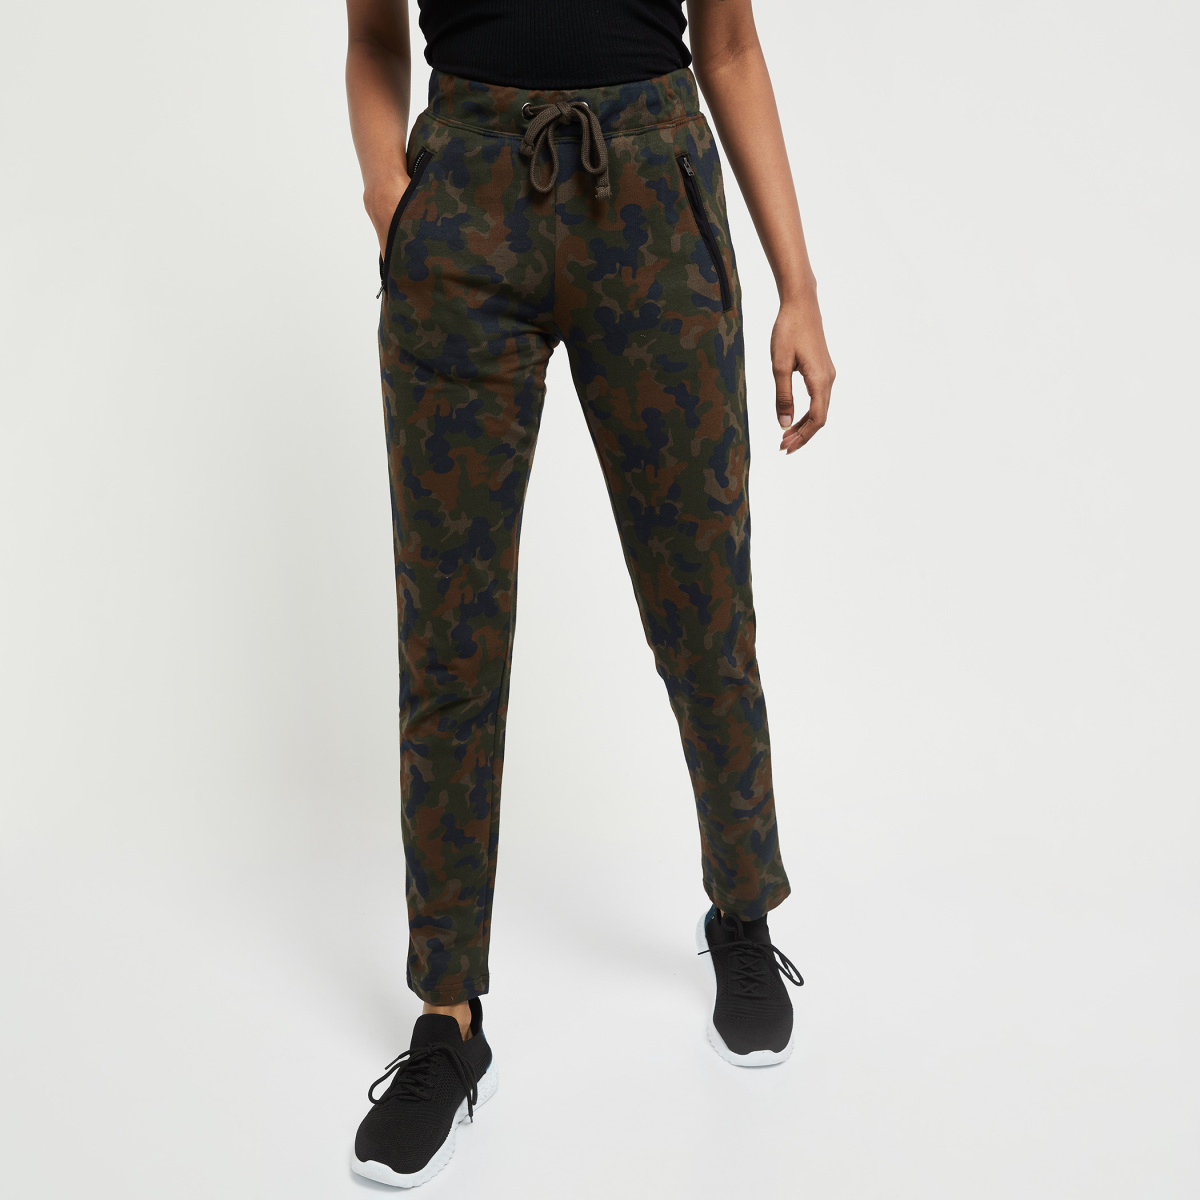 Buy Jubination Camouflague Army Print Cotton Jogger Trackpant Jeans Online  at Low Prices in India - Paytmmall.com